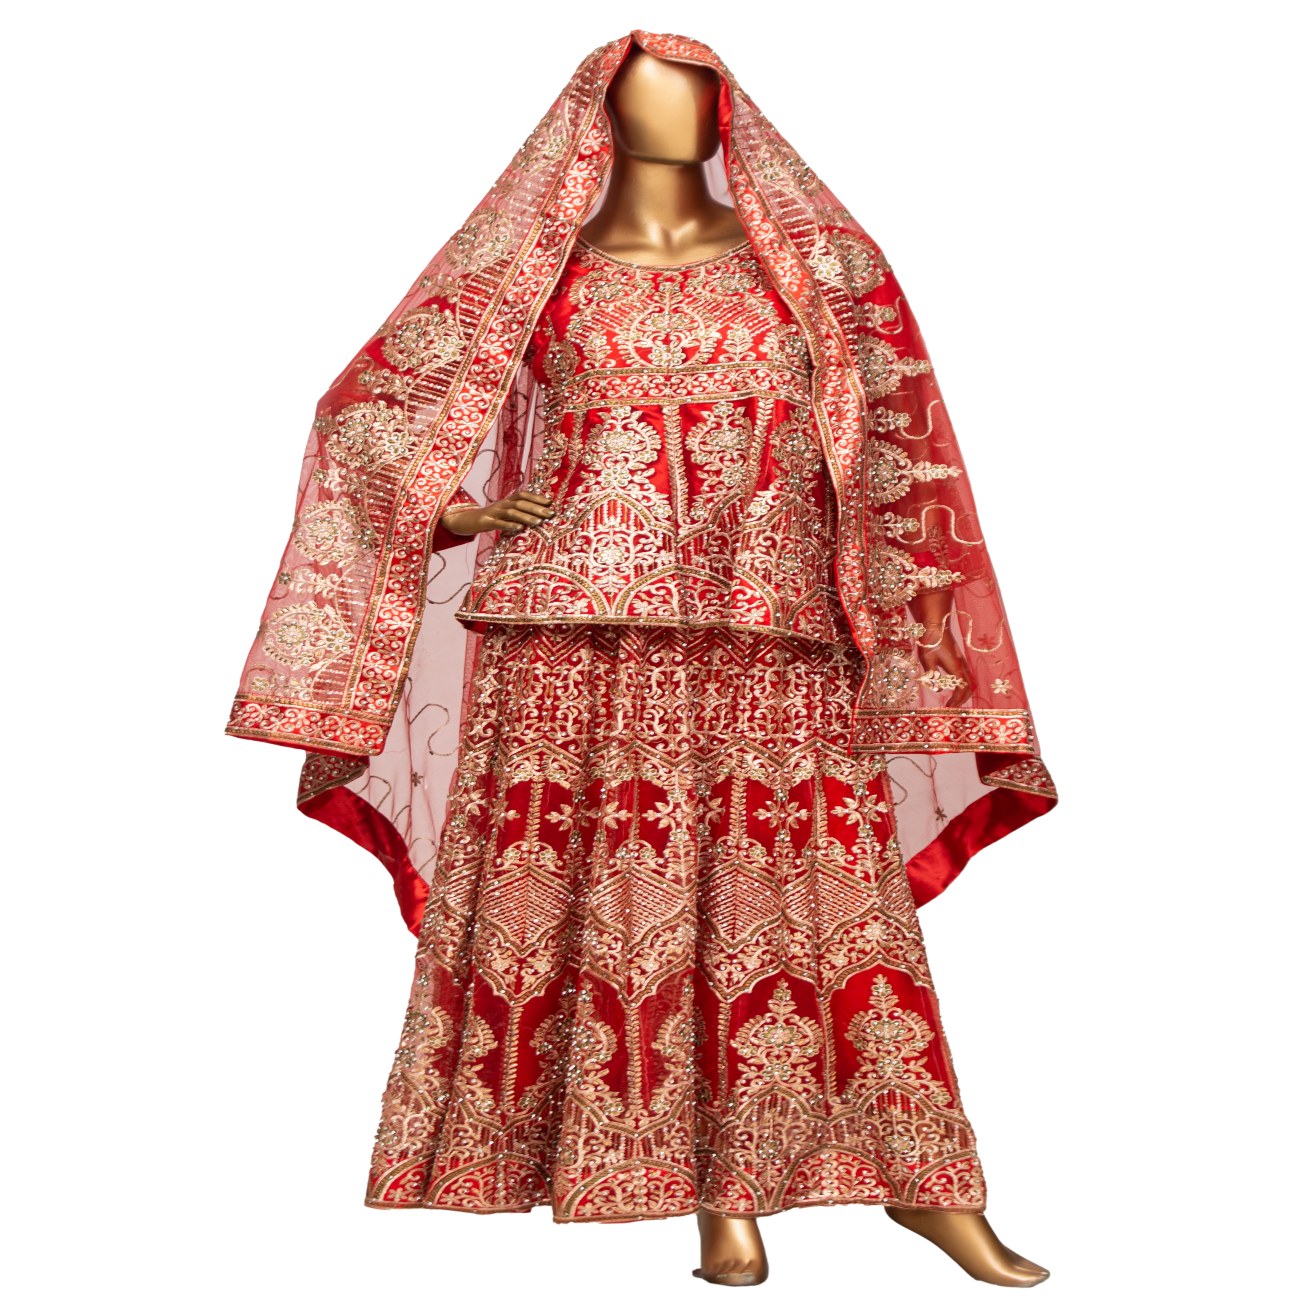 Pakistani Bridal Dress In Pune (Poona) - Prices, Manufacturers & Suppliers